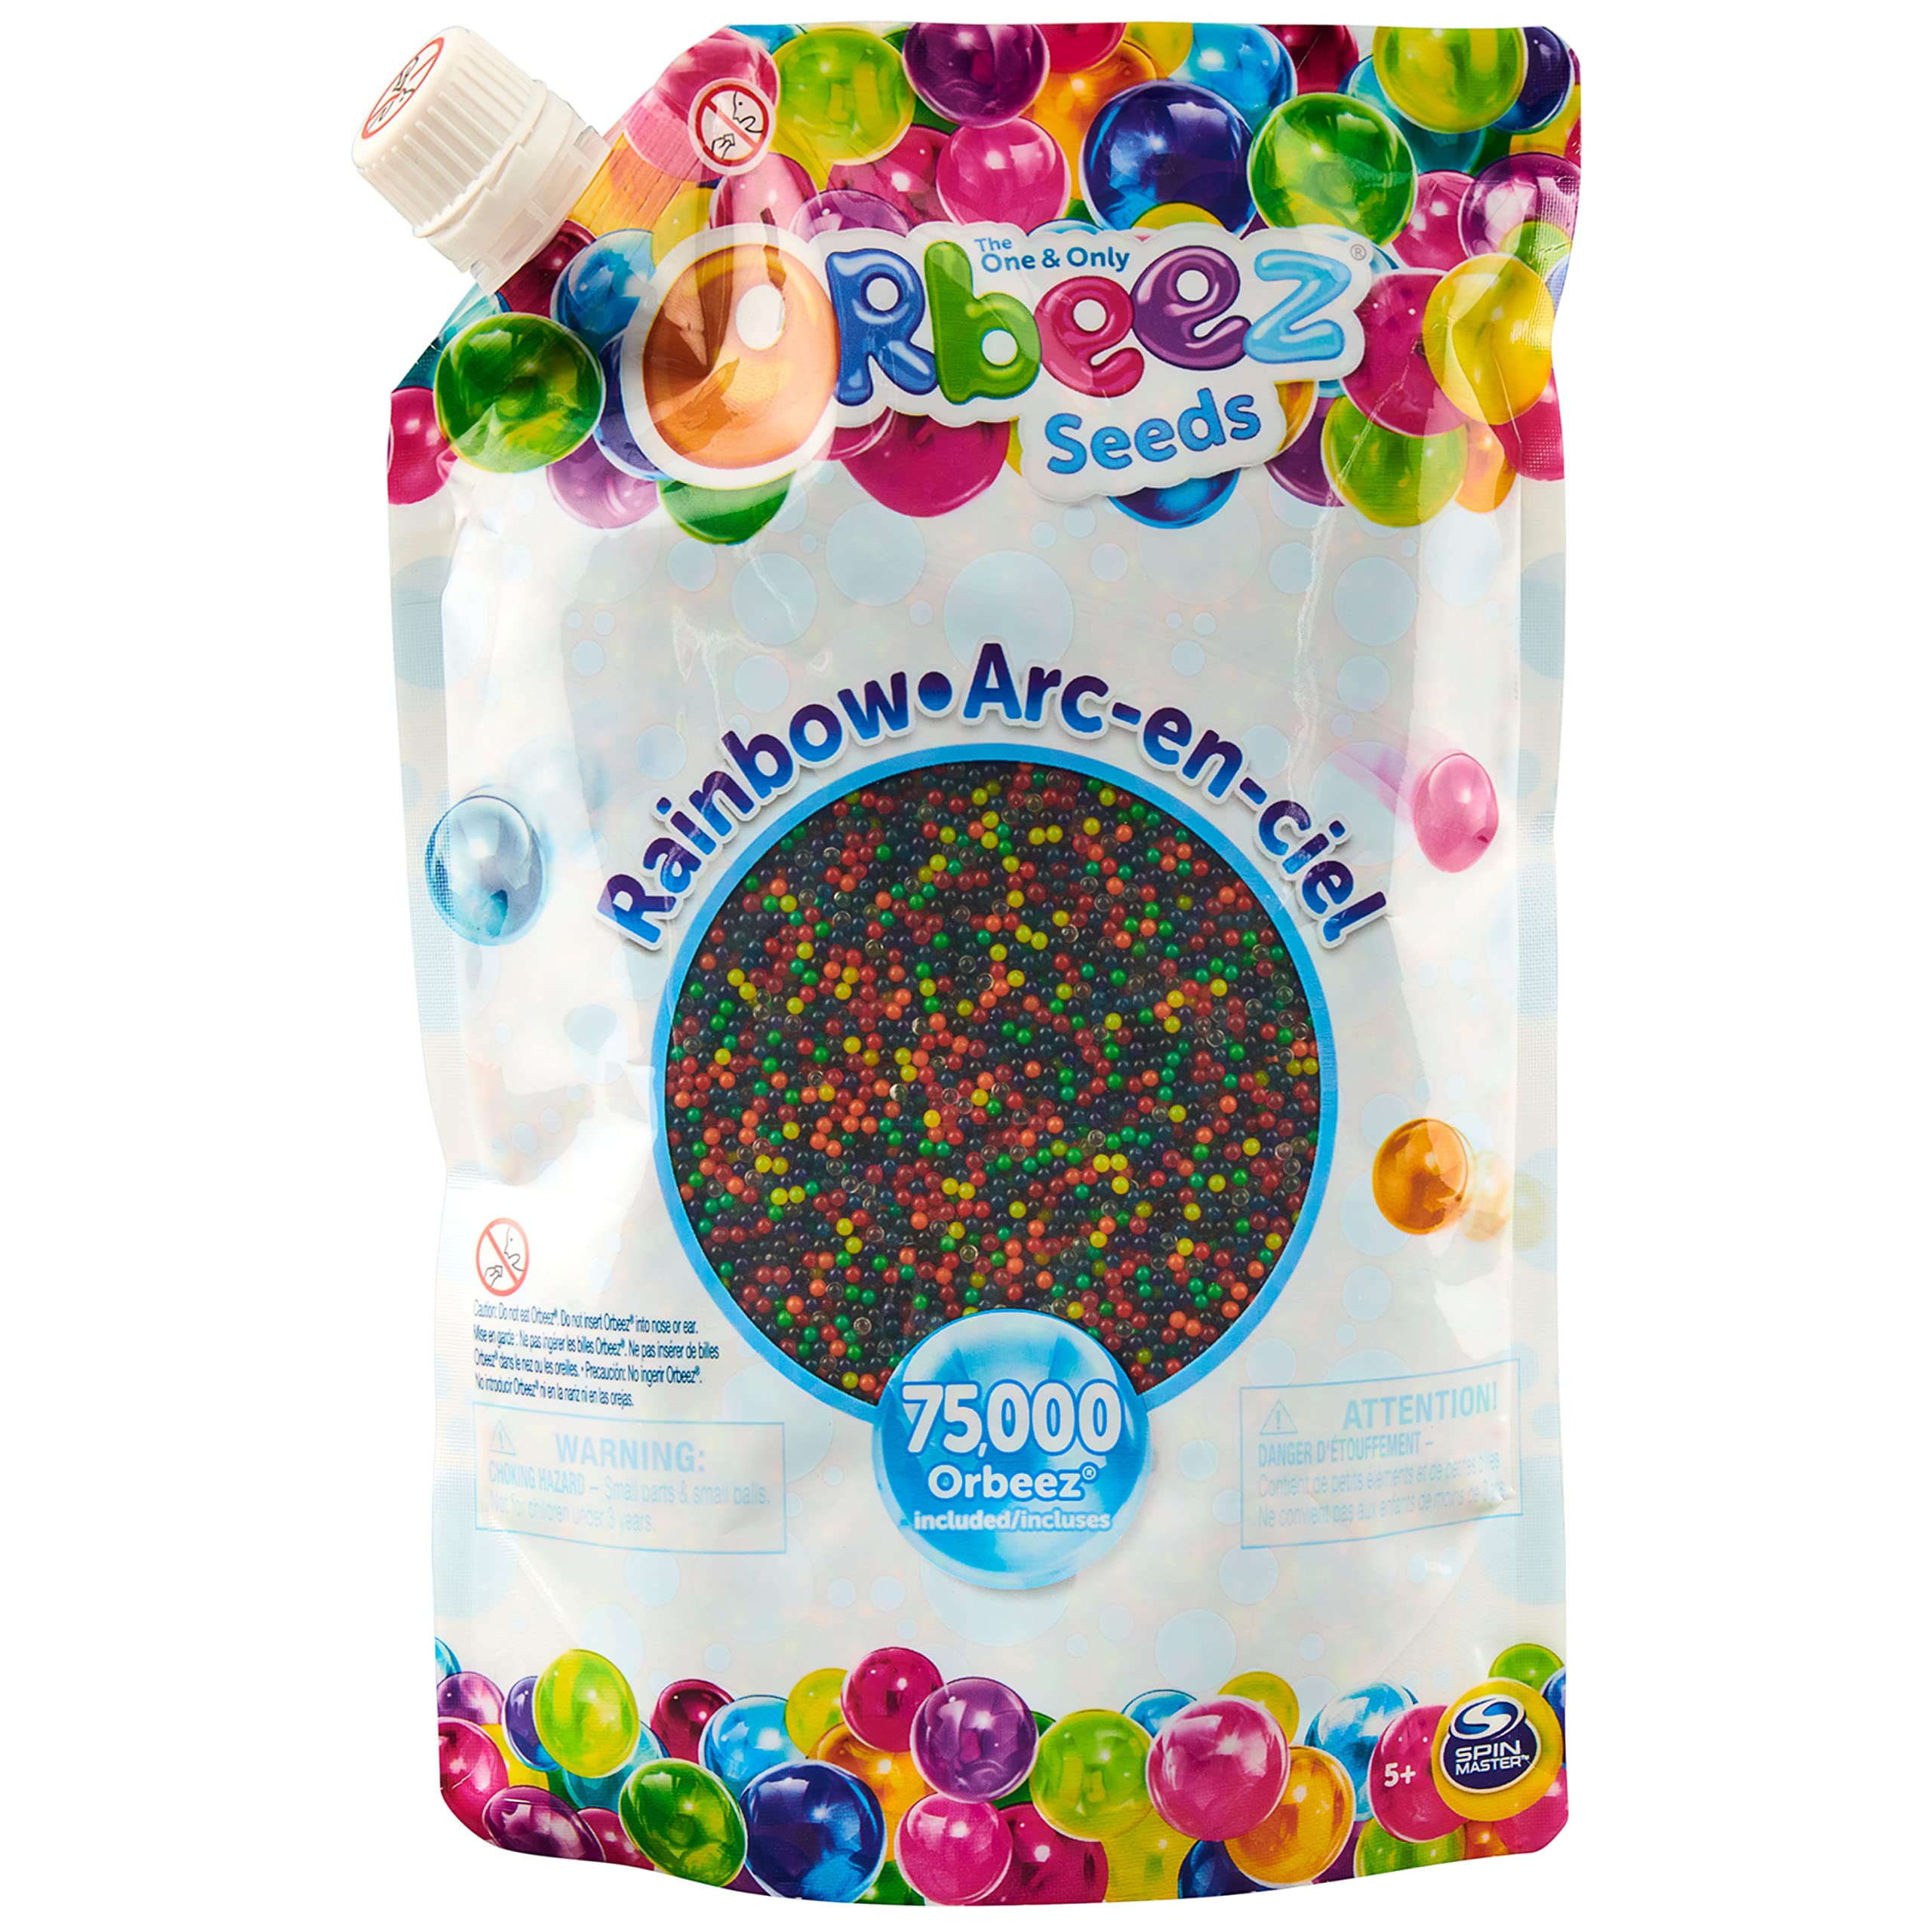 Orbeez Water Beads, The One and Only, 75,000 Rainbow Orbeez, Sensory Toy for Kids - $7.99 - Amazon